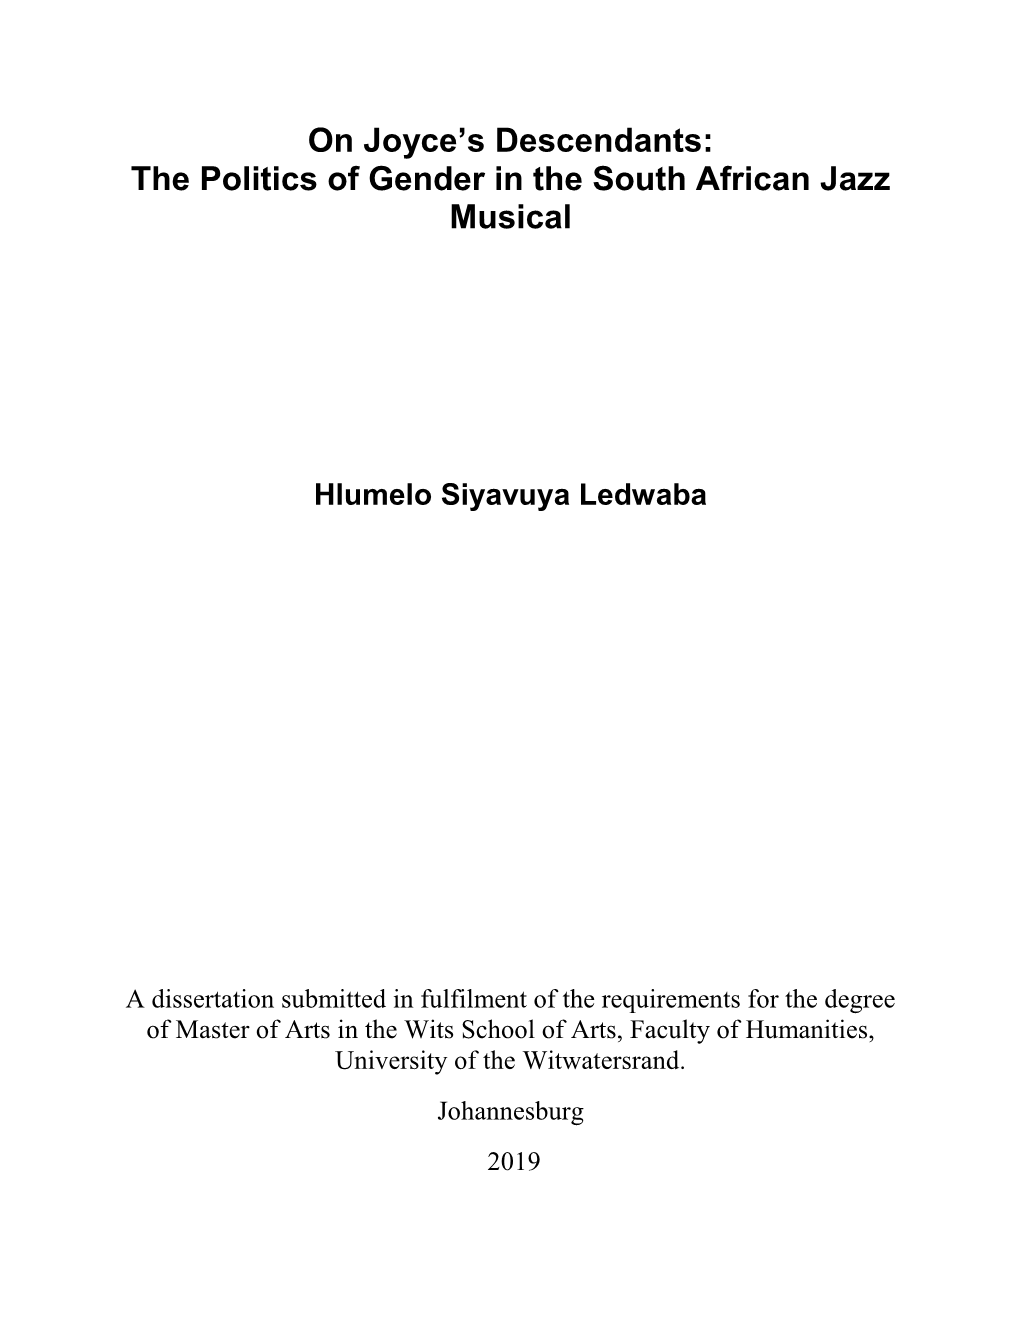 The Politics of Gender in the South African Jazz Musical